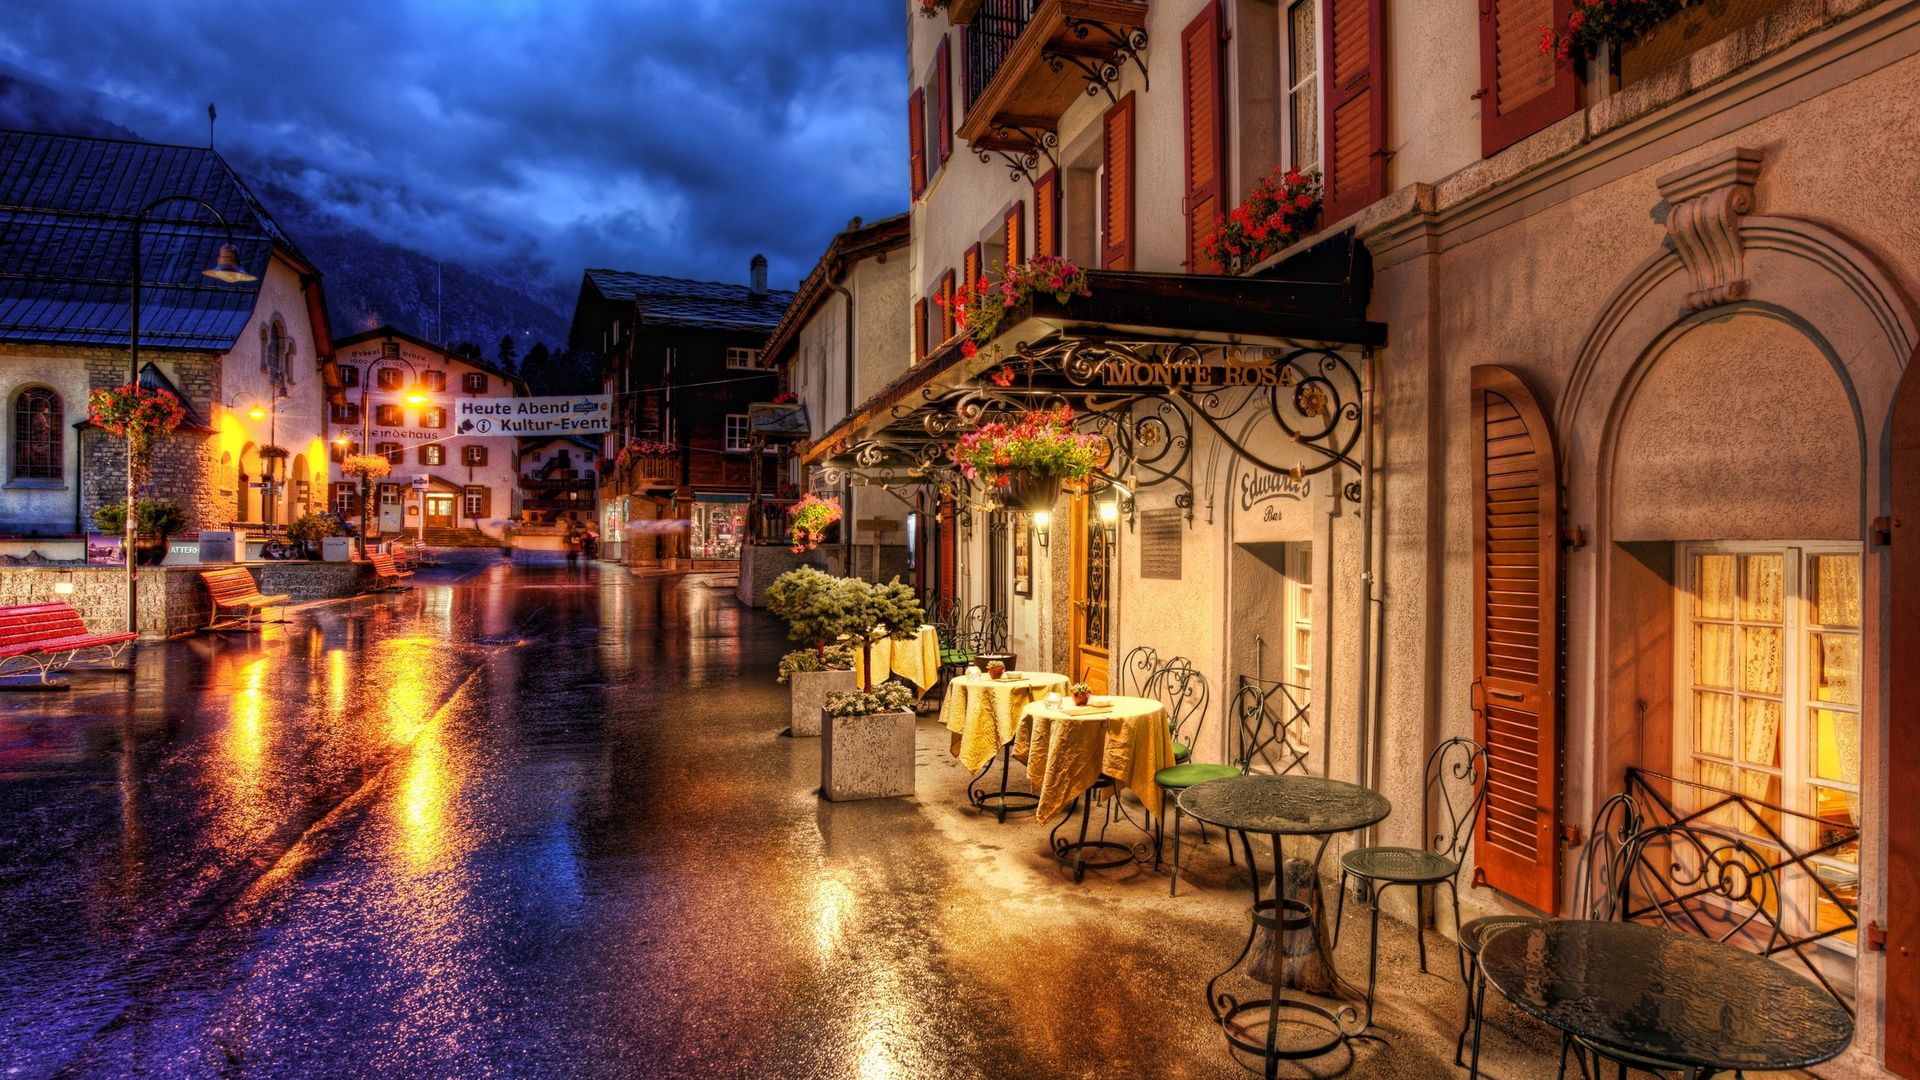 photography, hdr, shop, switzerland, town